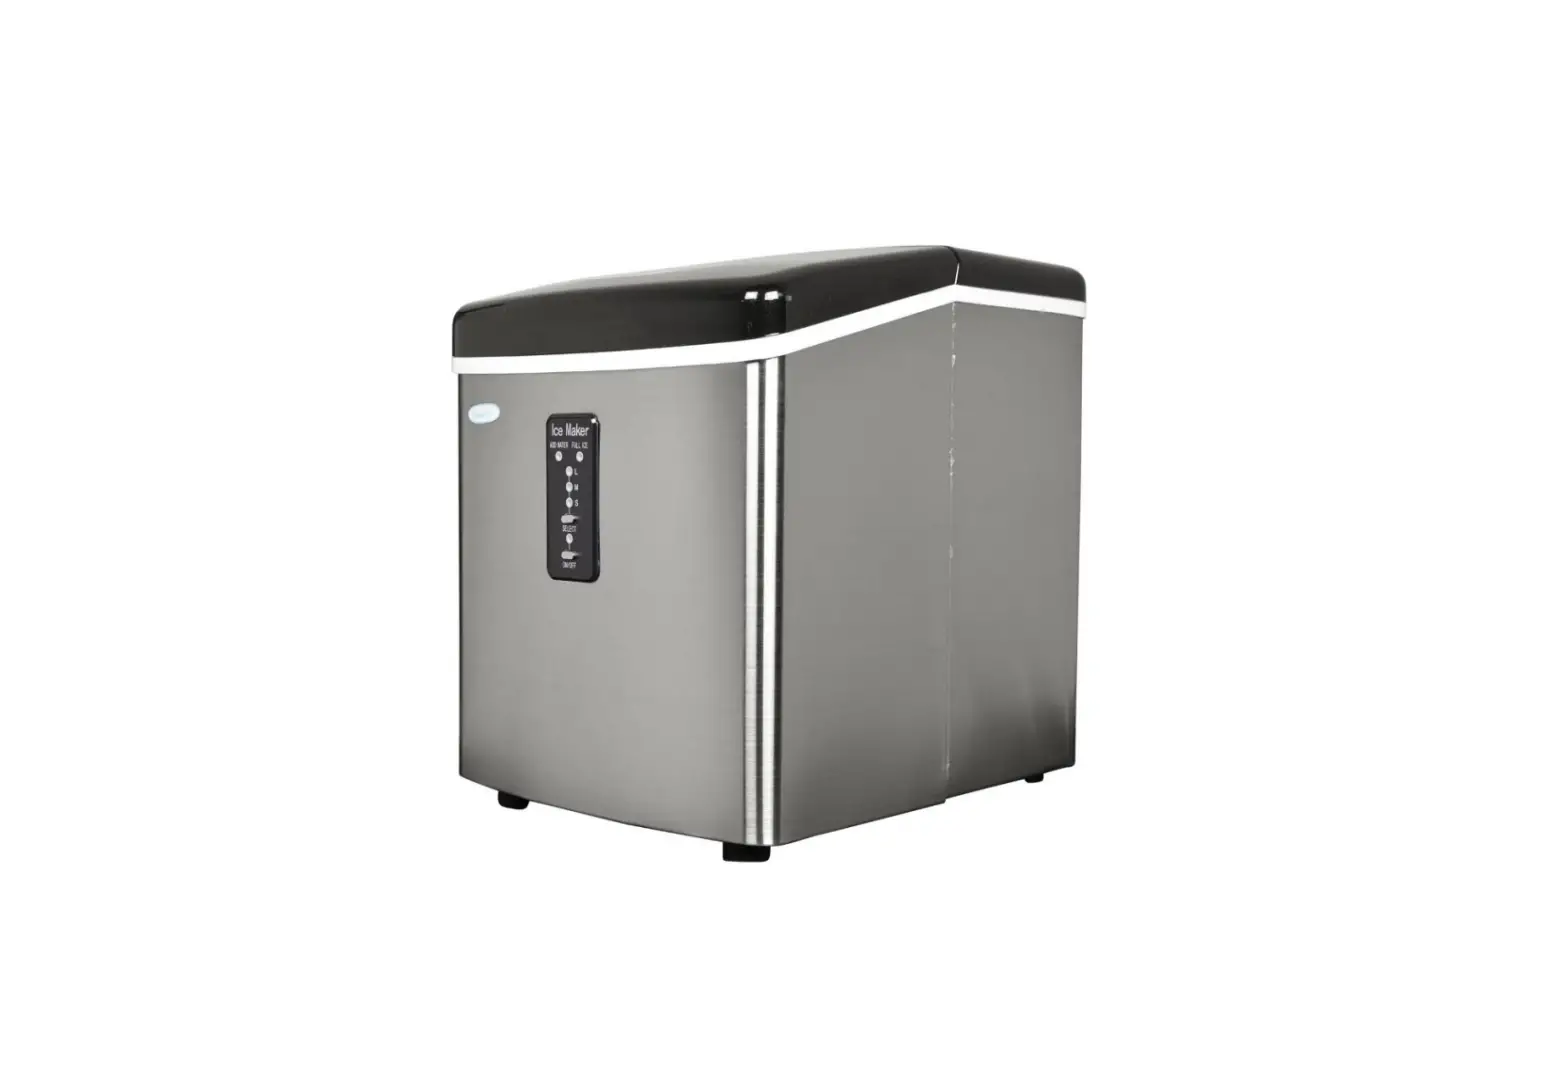 newair AI-100SS Portable Countertop Ice Maker Owner's Manual